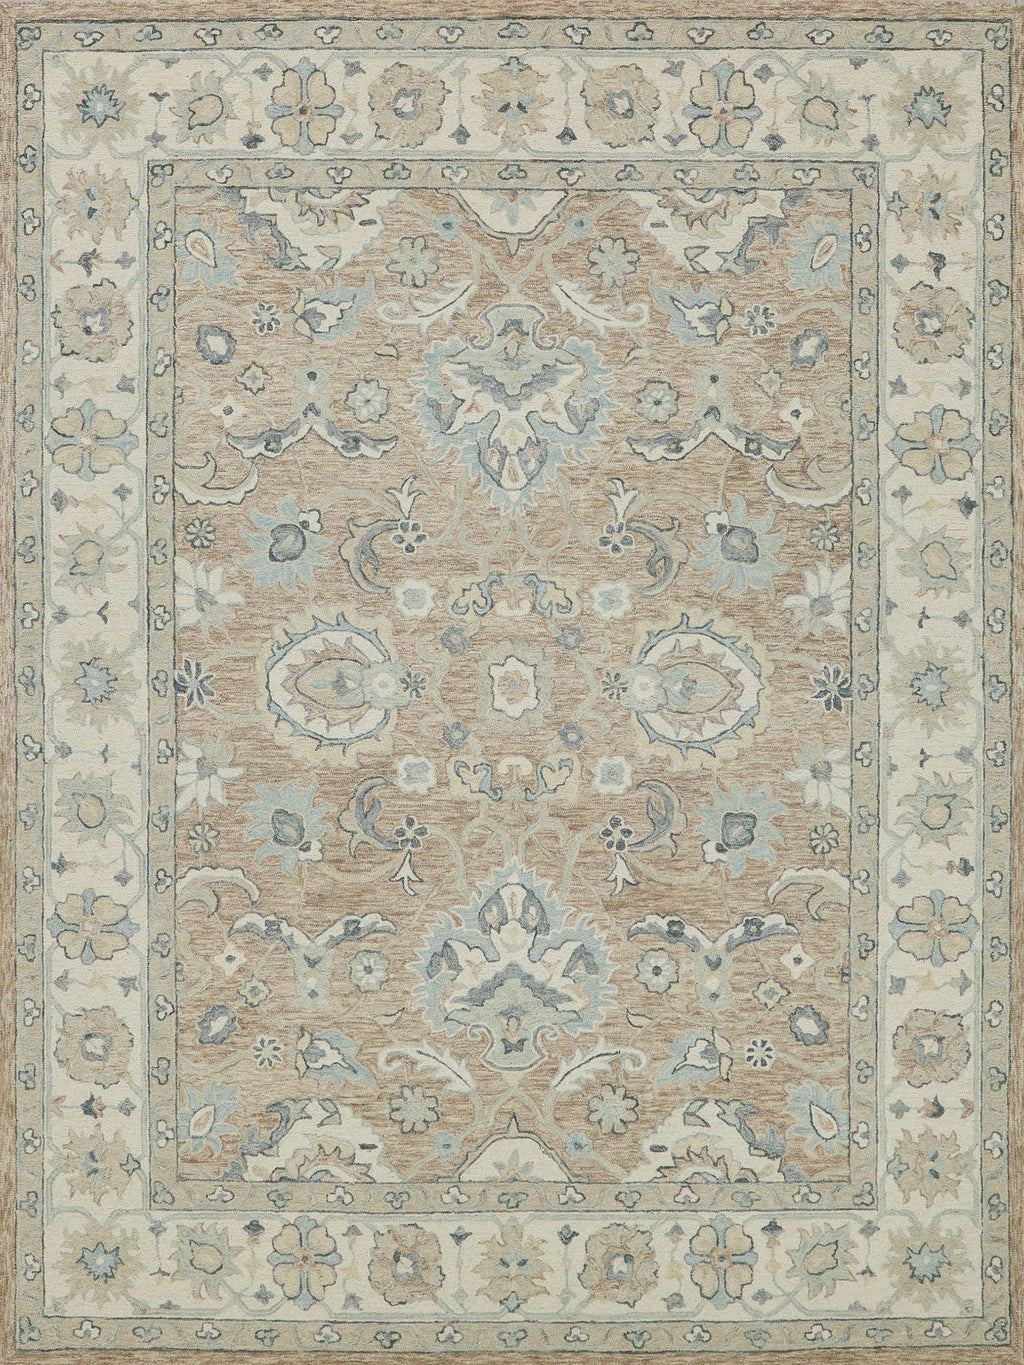 Exquisite Rugs Claremont Oushak 6795 Light Brown/Ivory Area Rug